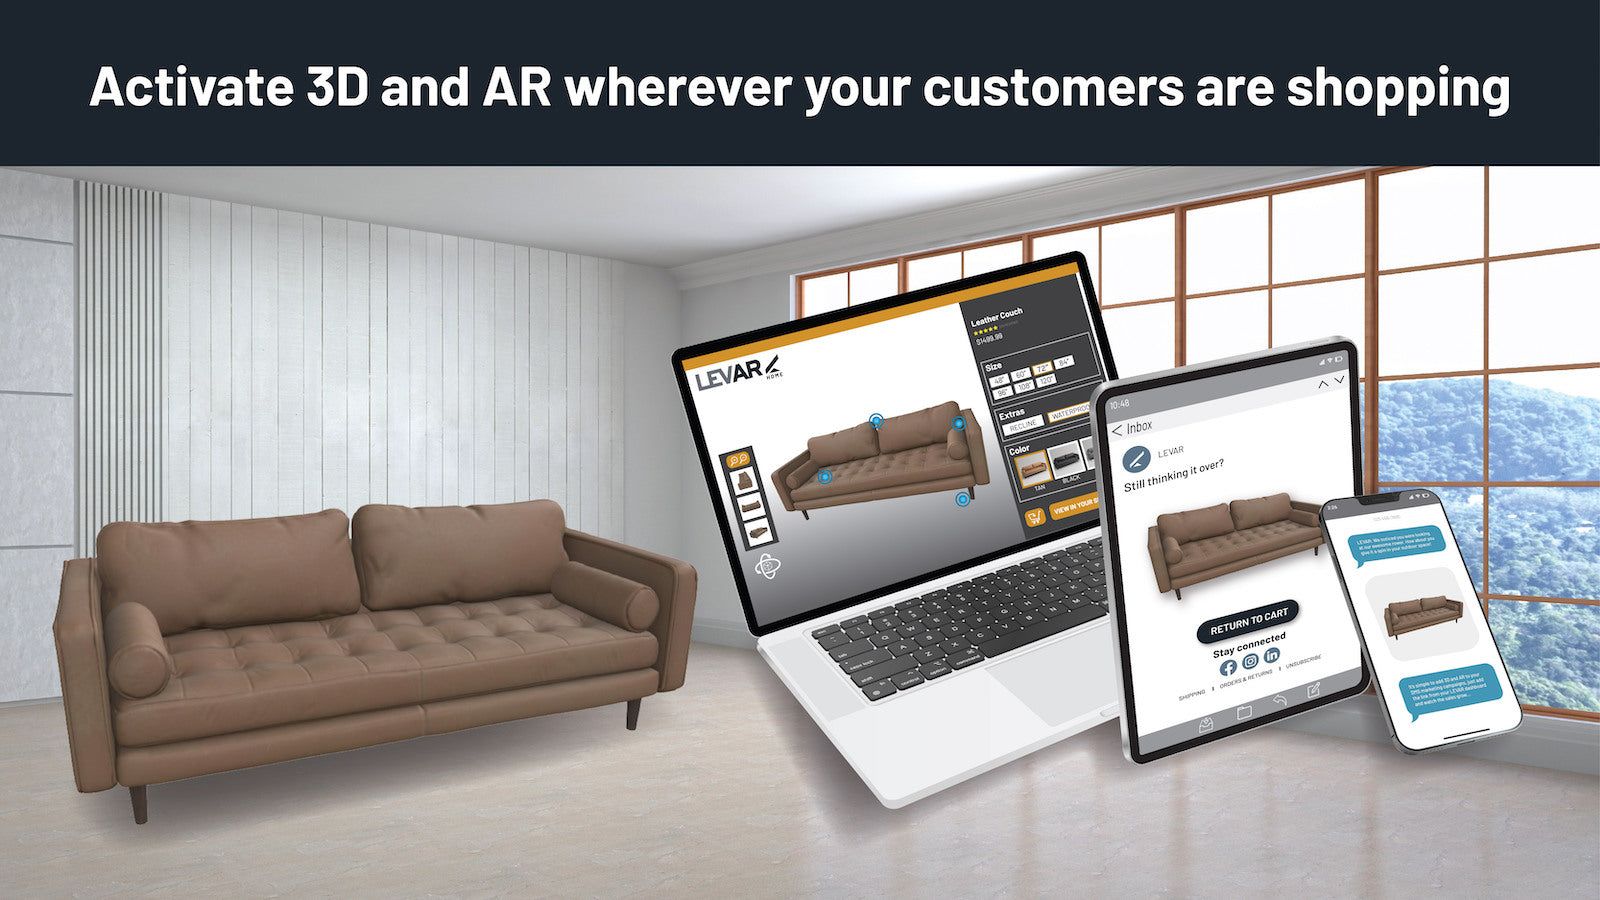 Activate 3D and AR wherever your customers are shopping